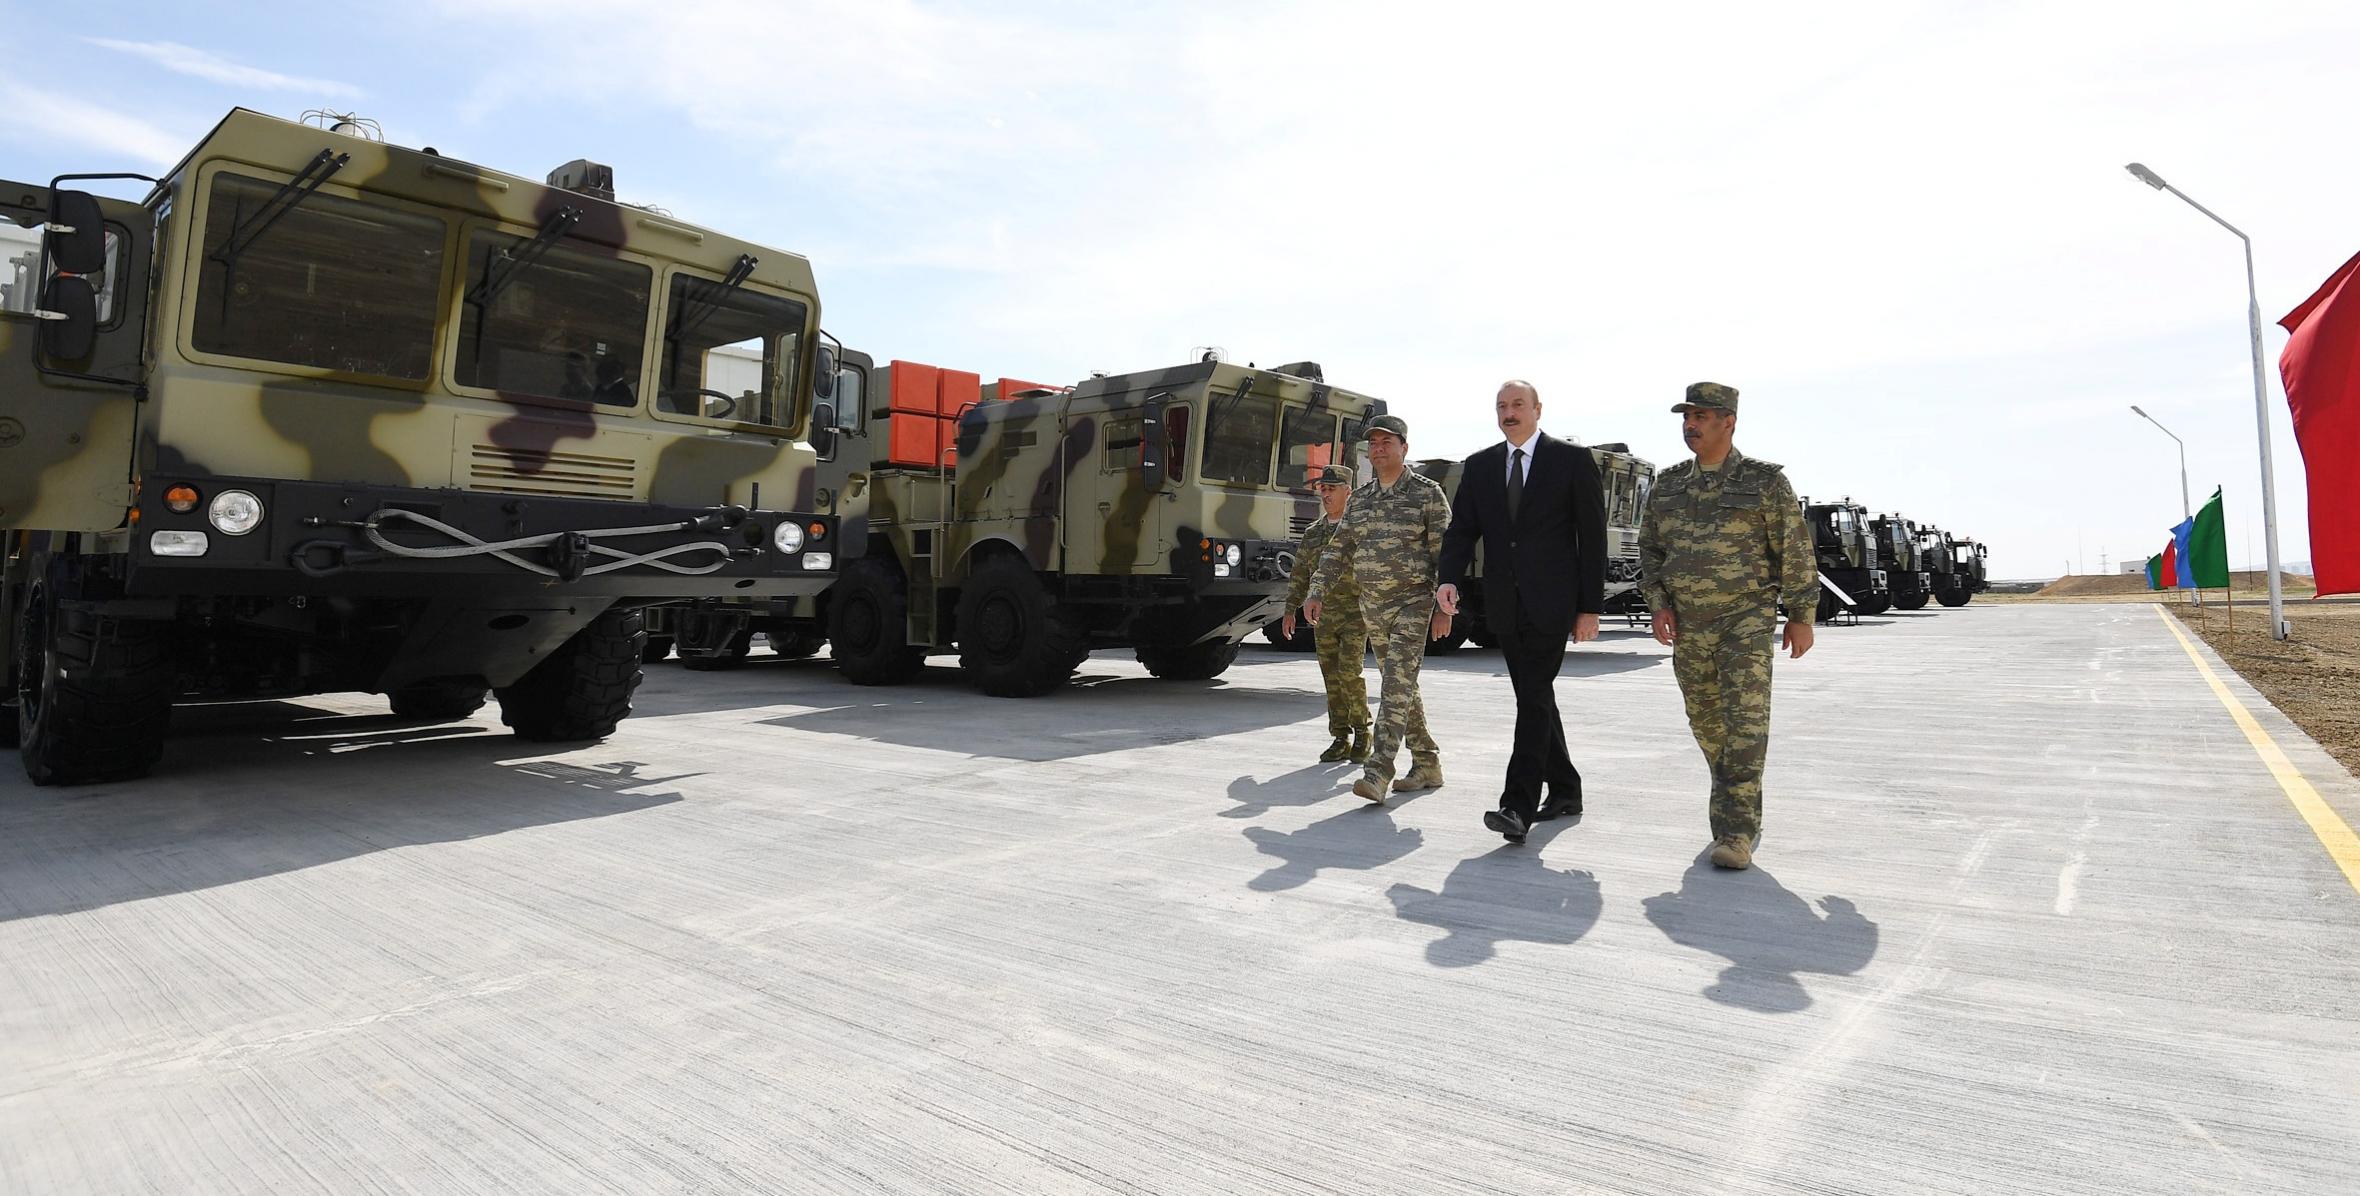 Ilham Aliyev inaugurated Defense Ministry’s military unit